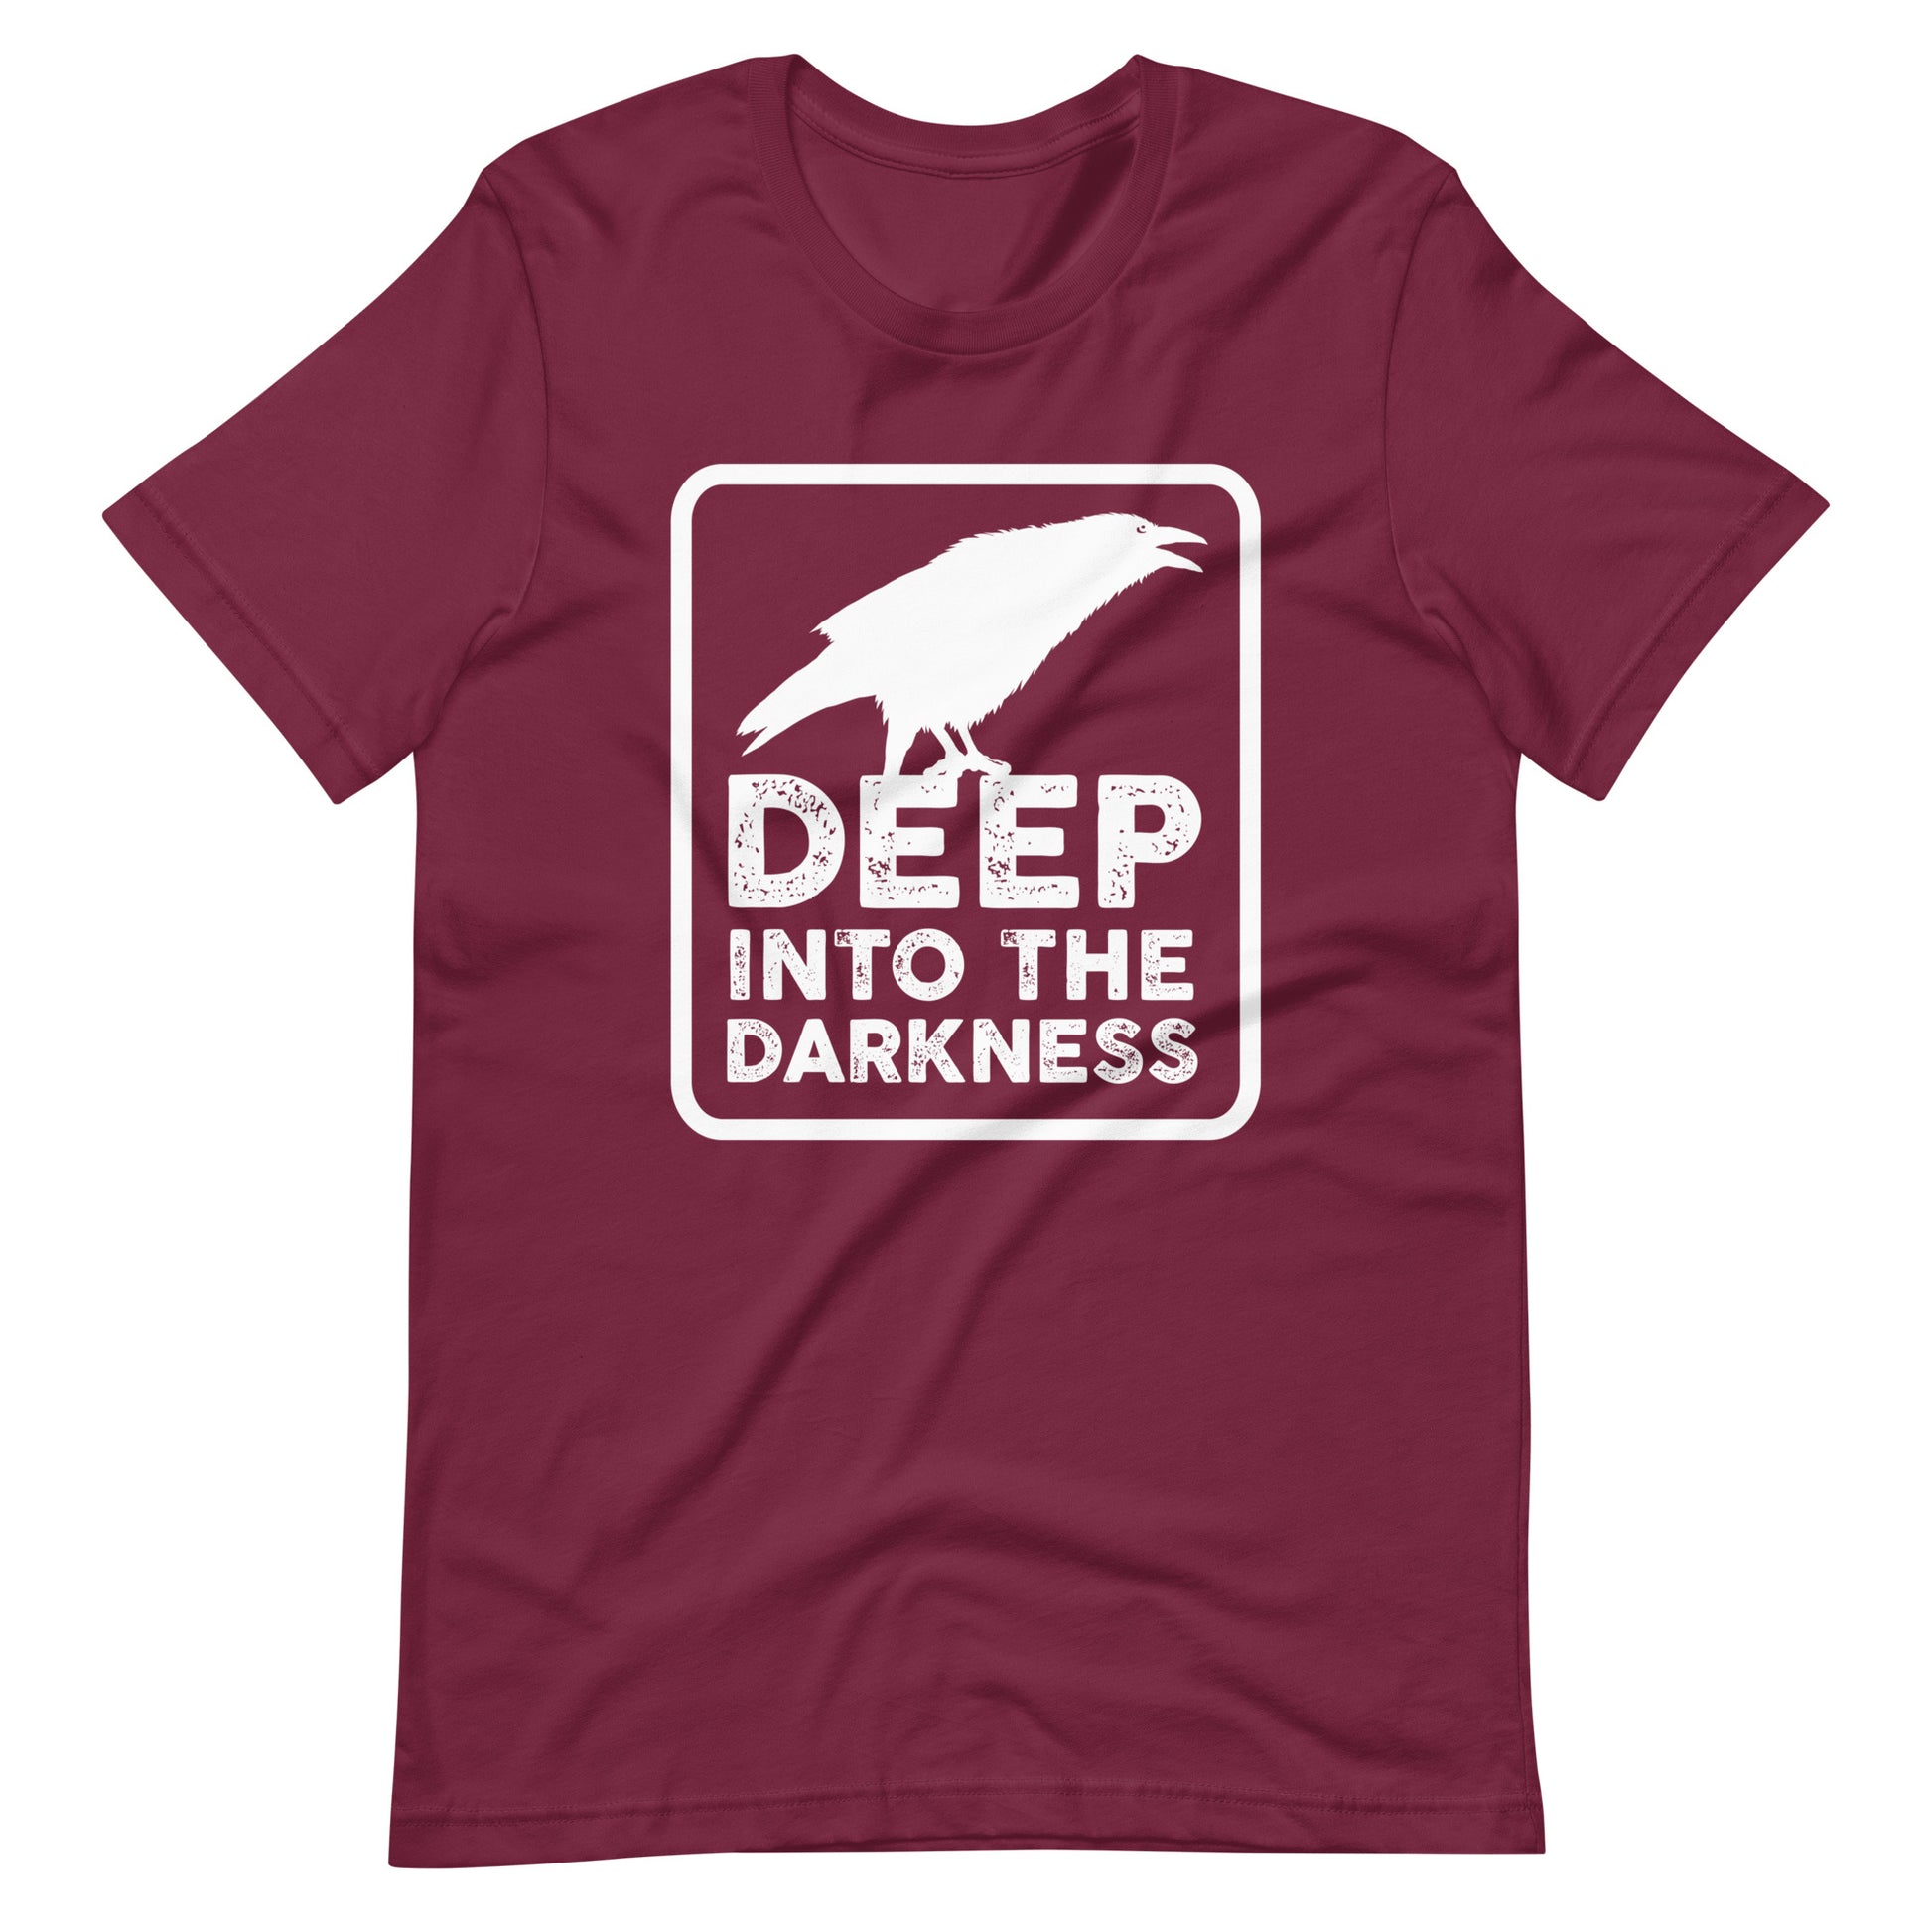 Raven Deep Into the Darkness - Men's t-shirt - Maroon Front